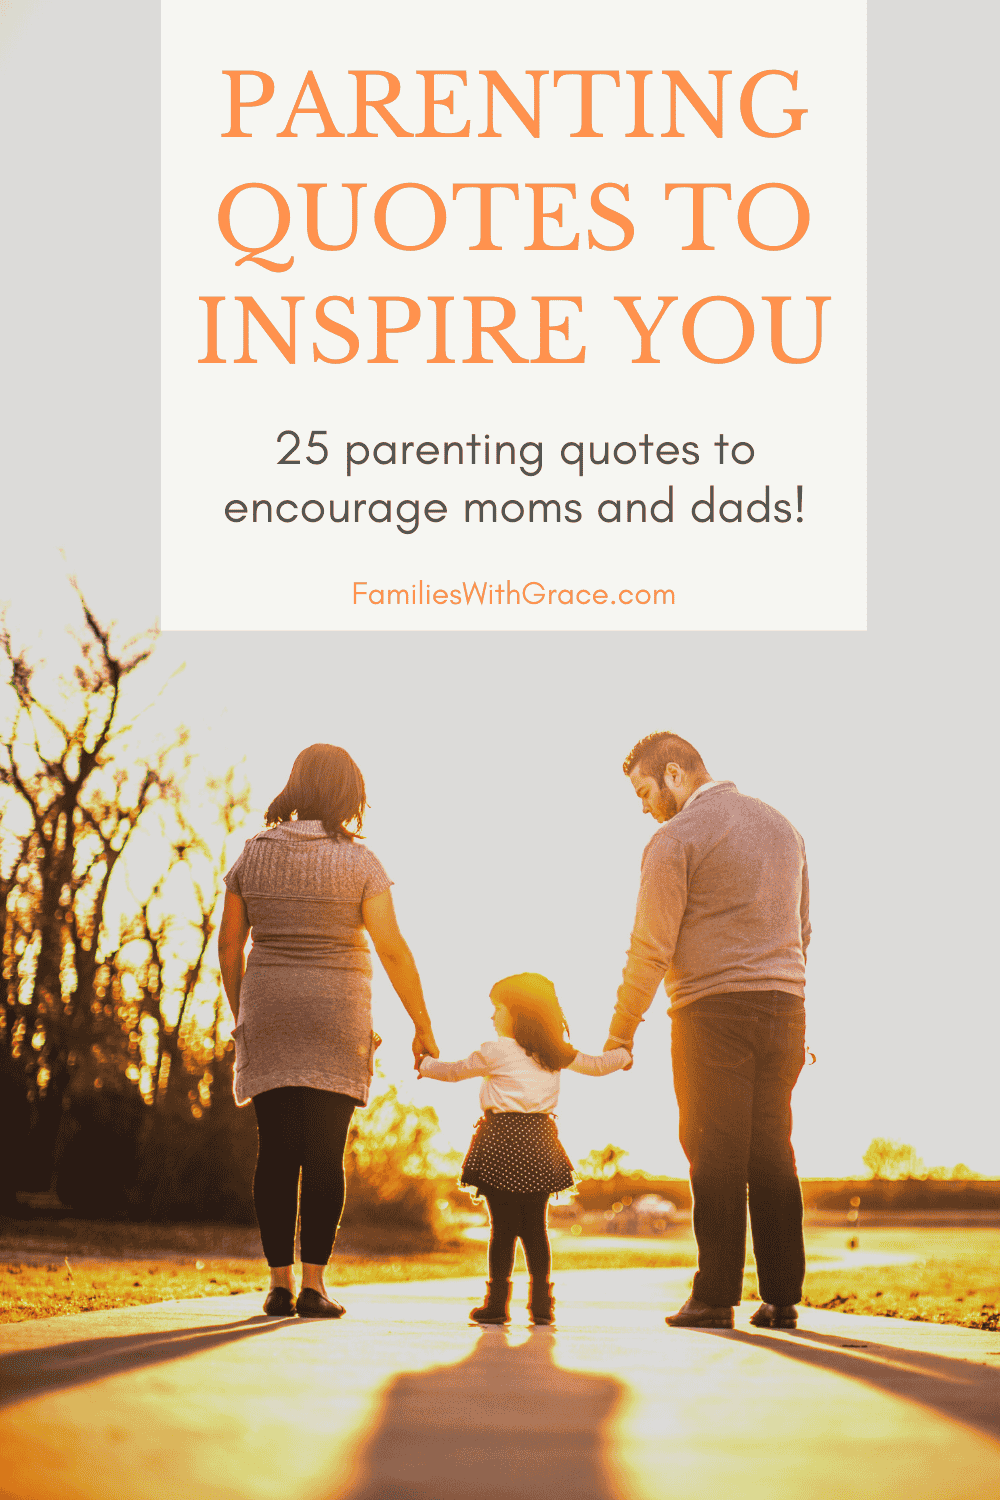 Parenting quotes to inspire you